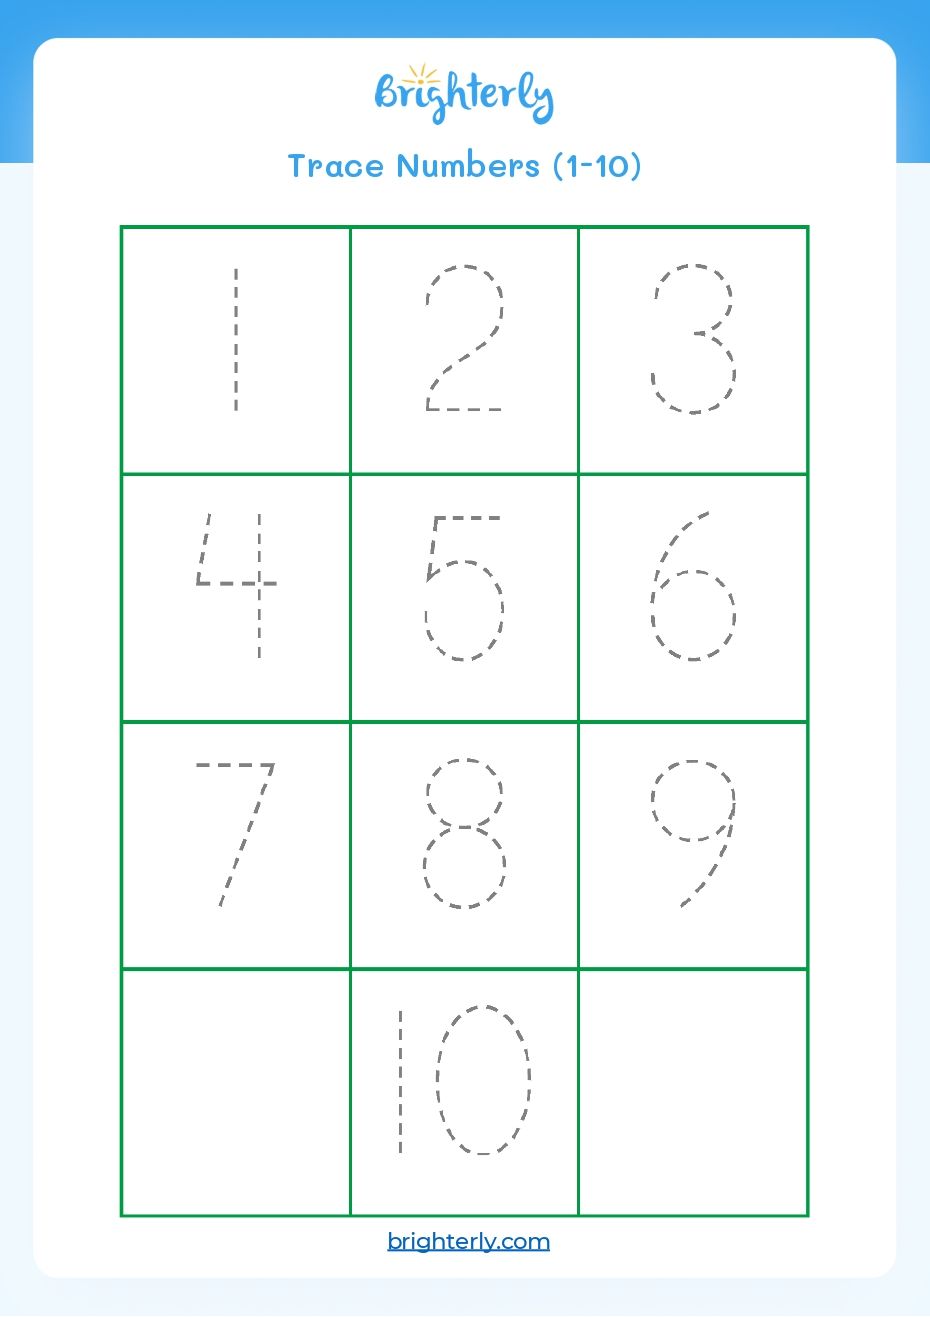 tracing-numbers-1-10-worksheets-kindergarten-pdf-name-tracing-trace